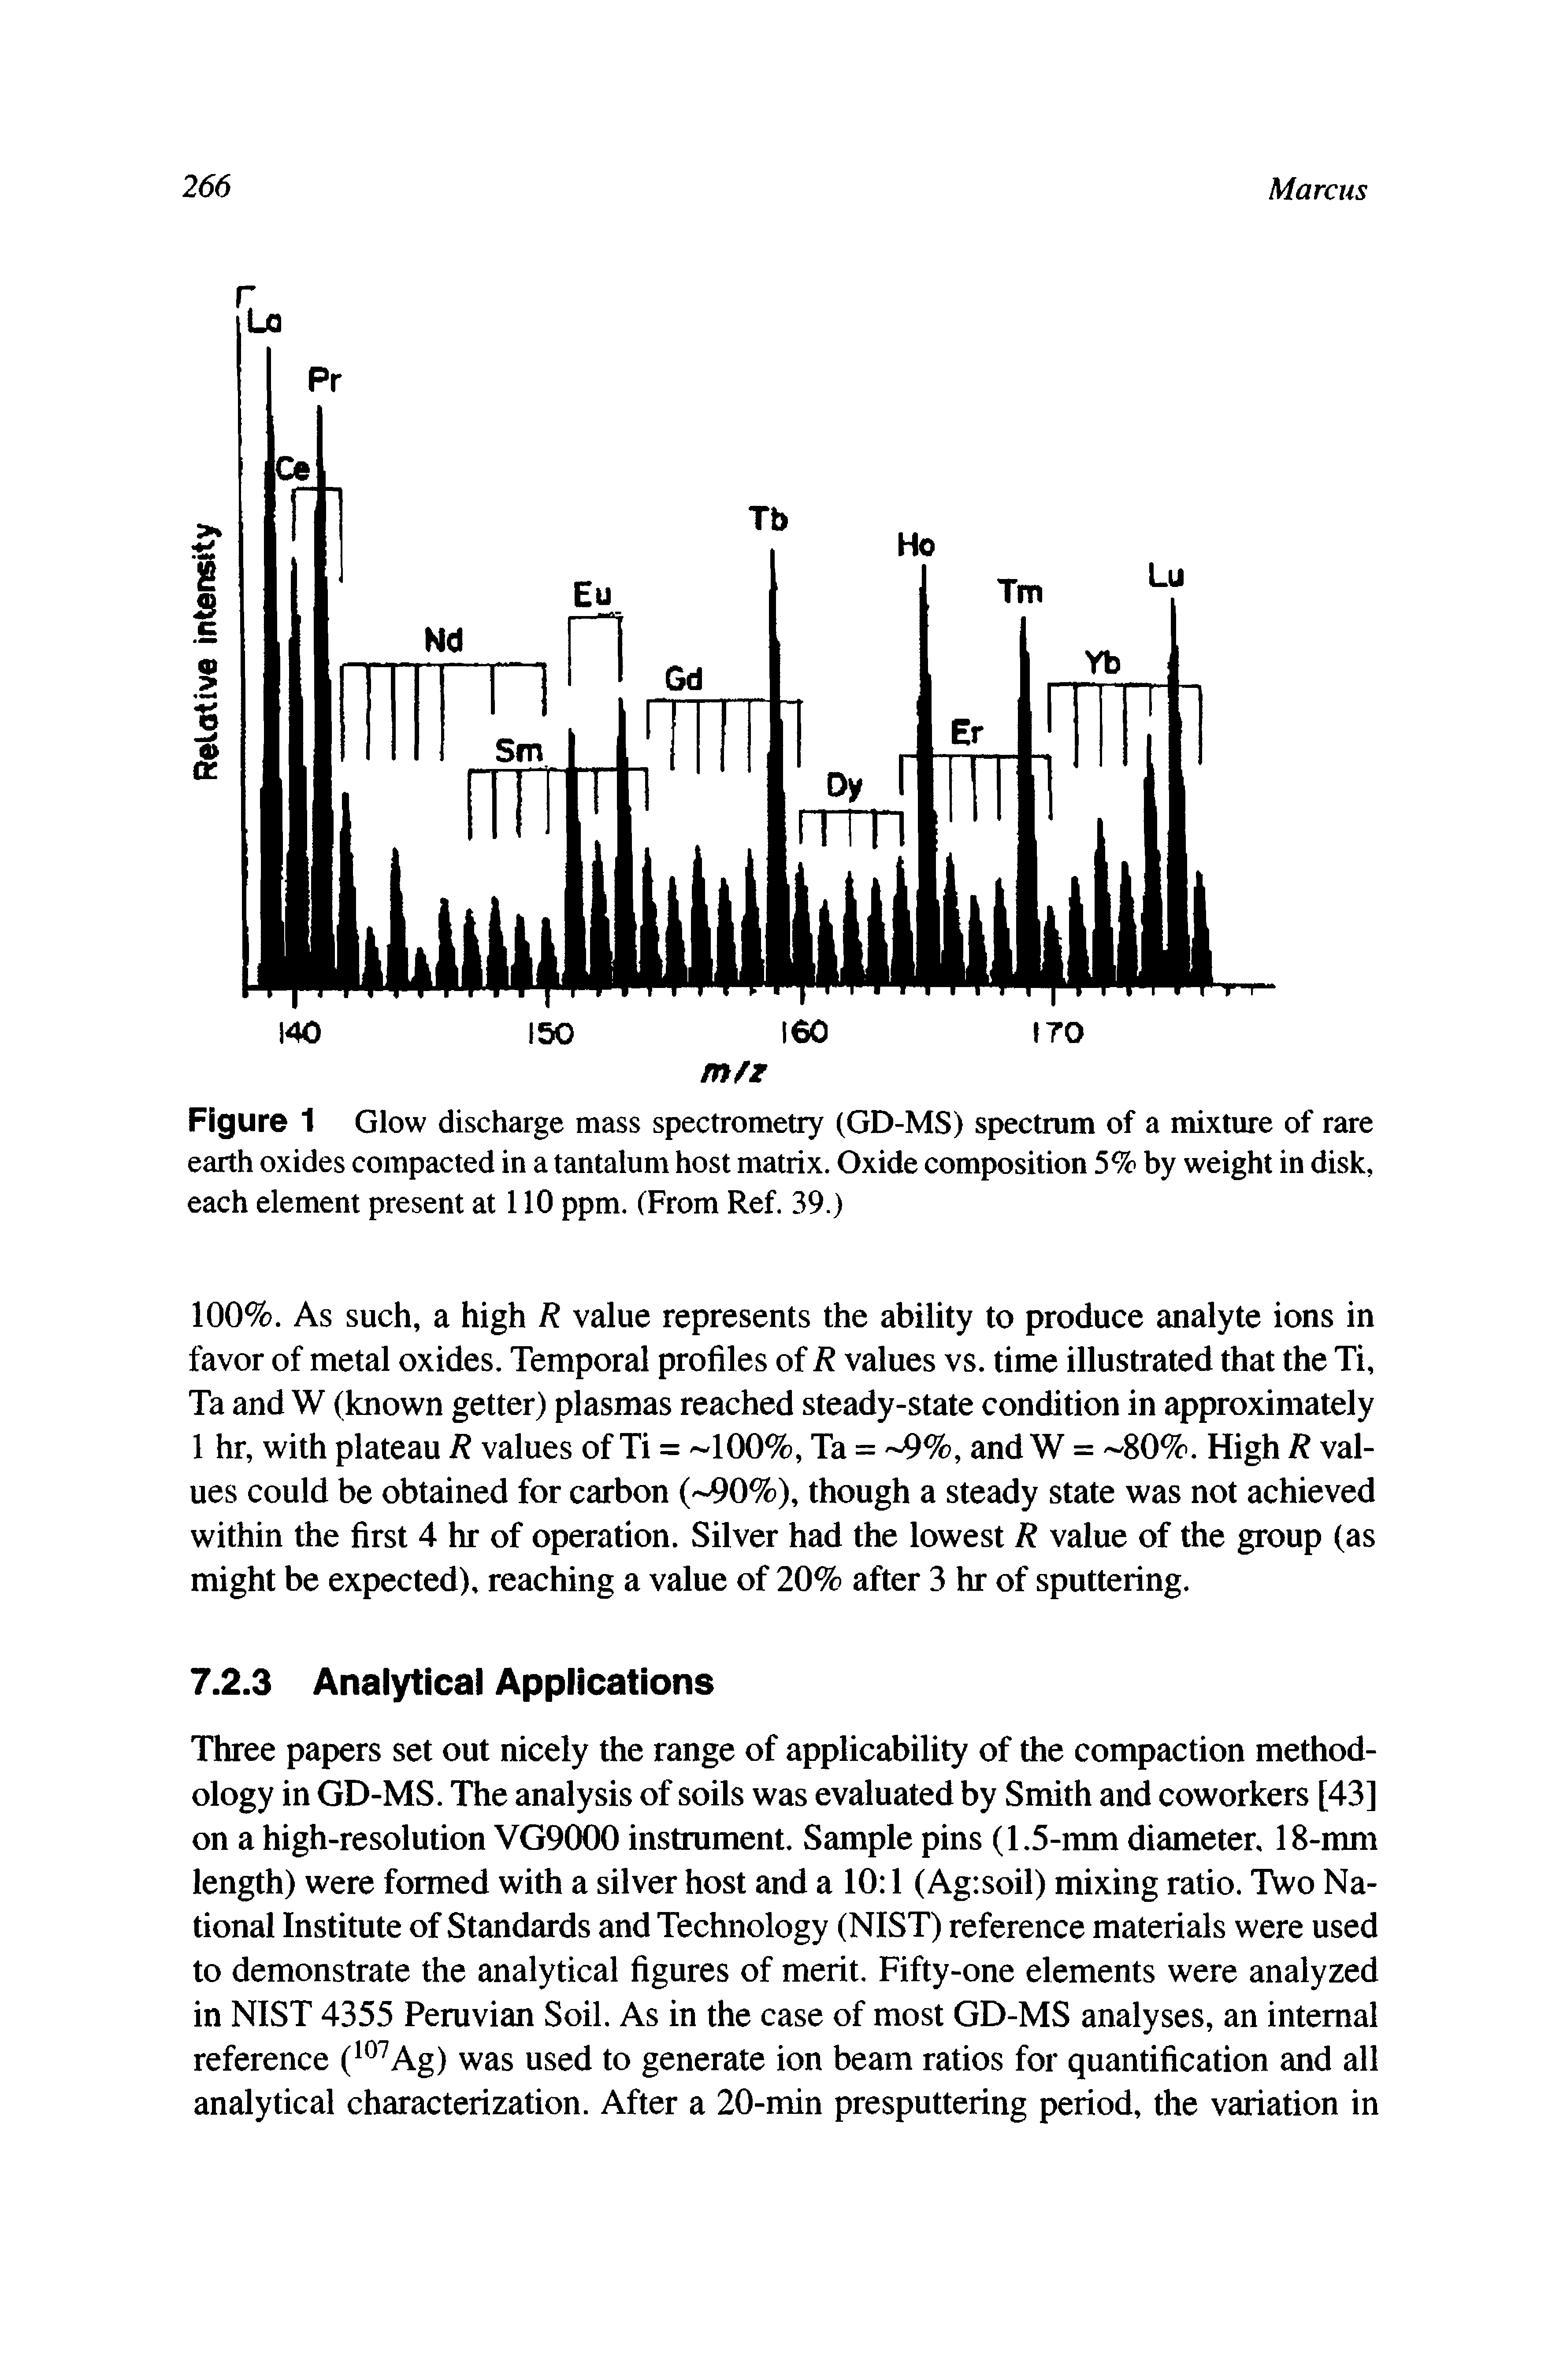 Figure 1 Glow discharge mass spectrometry (GD-MS) spectrum of a mixture of rare earth oxides compacted in a tantalum host matrix. Oxide composition 5% by weight in disk, each element present at 110 ppm. (From Ref. 39.)...